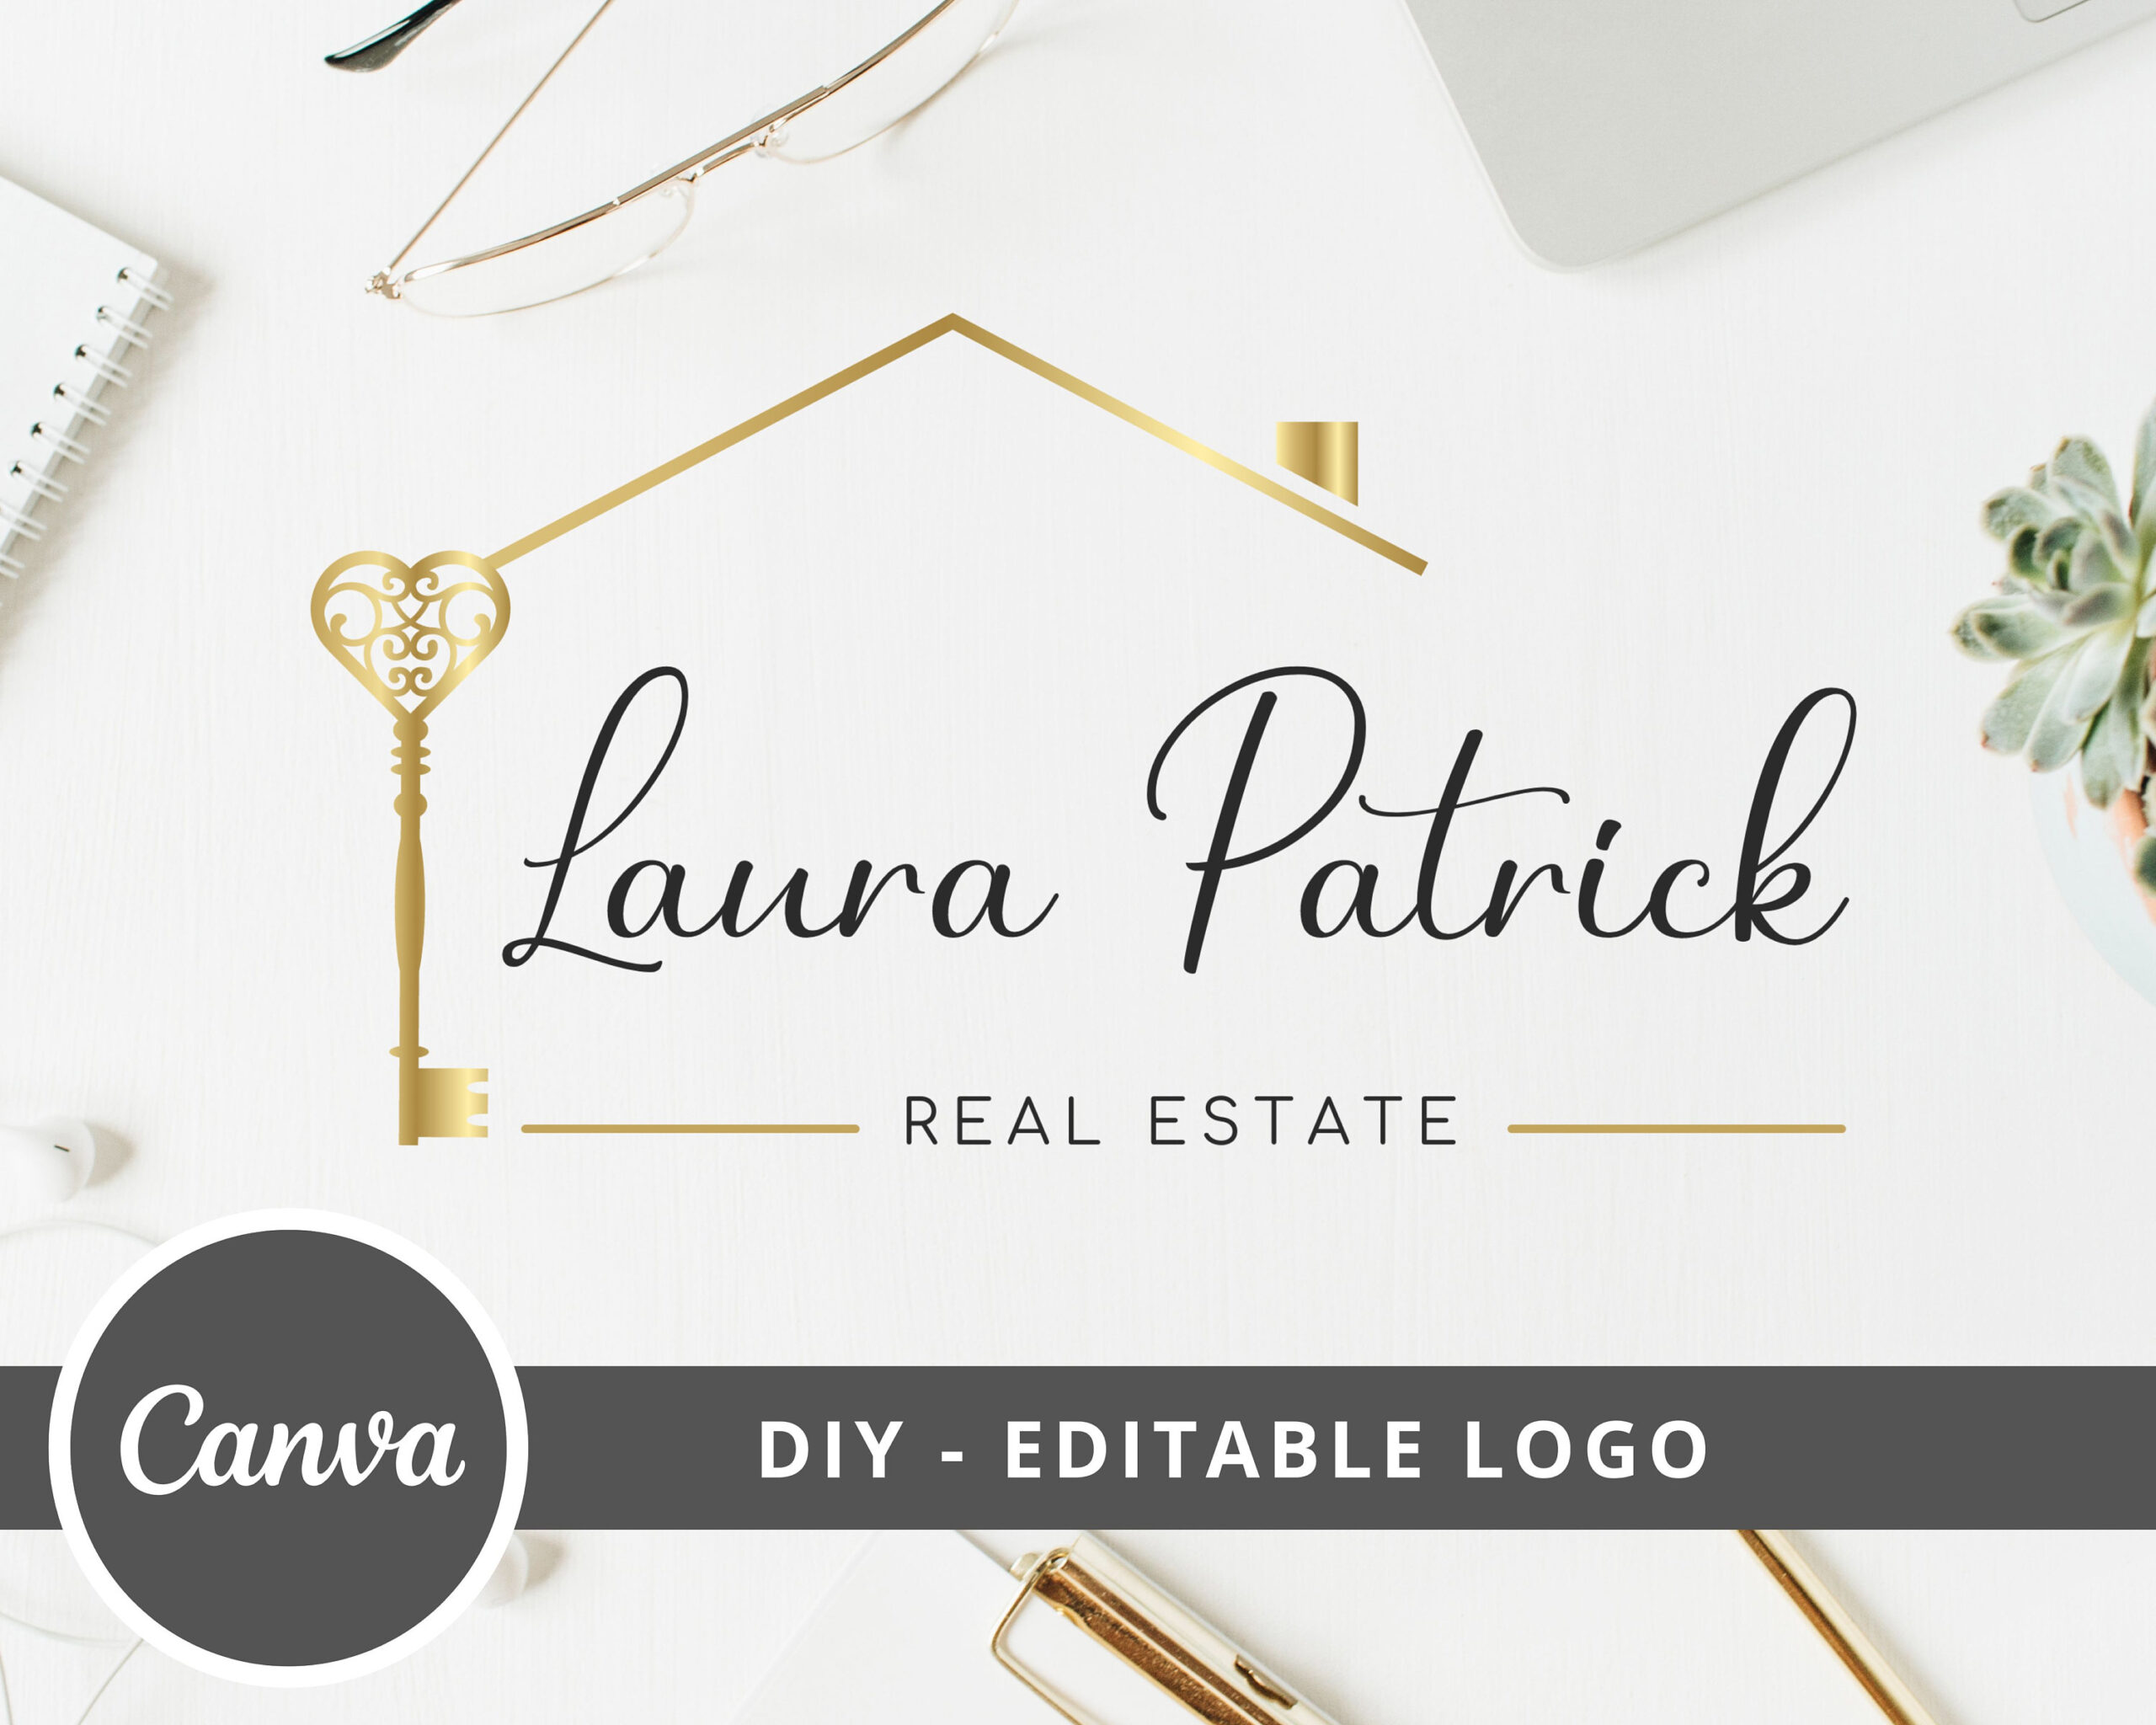 DIY Real Estate Logo Template, Fully Editable Logo, Classic Key Logo, Realtor Logo, Real Estate Branding is a business logo, Instant Access